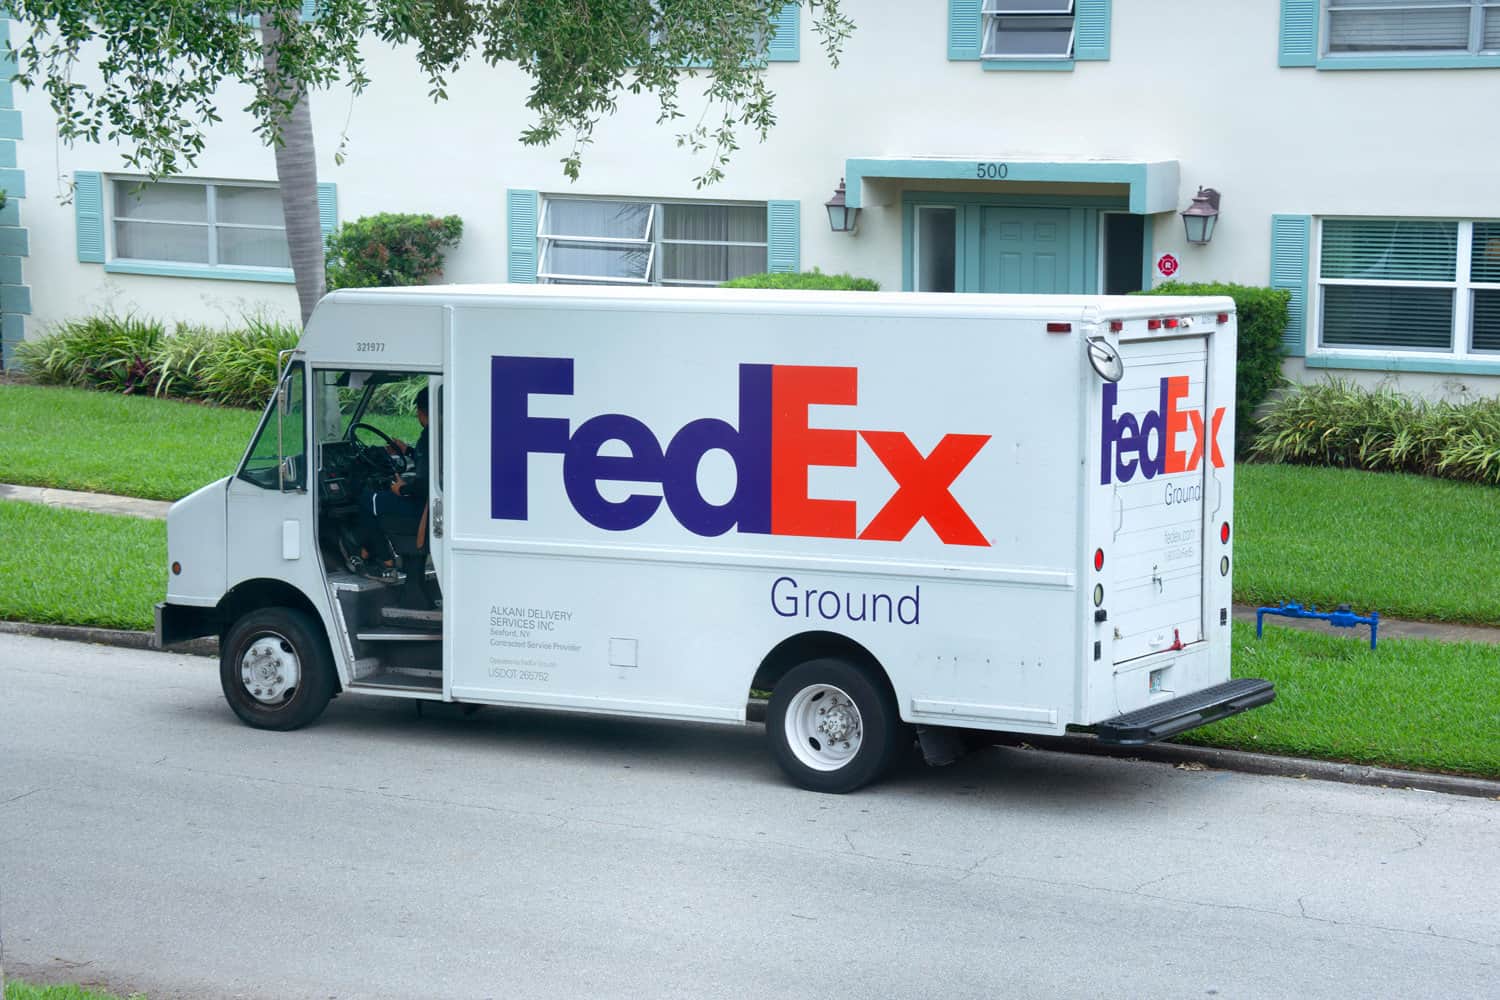 FedEx truck van parked on side of road to deliver ground delivery packages to someone who lives in an apartment building.